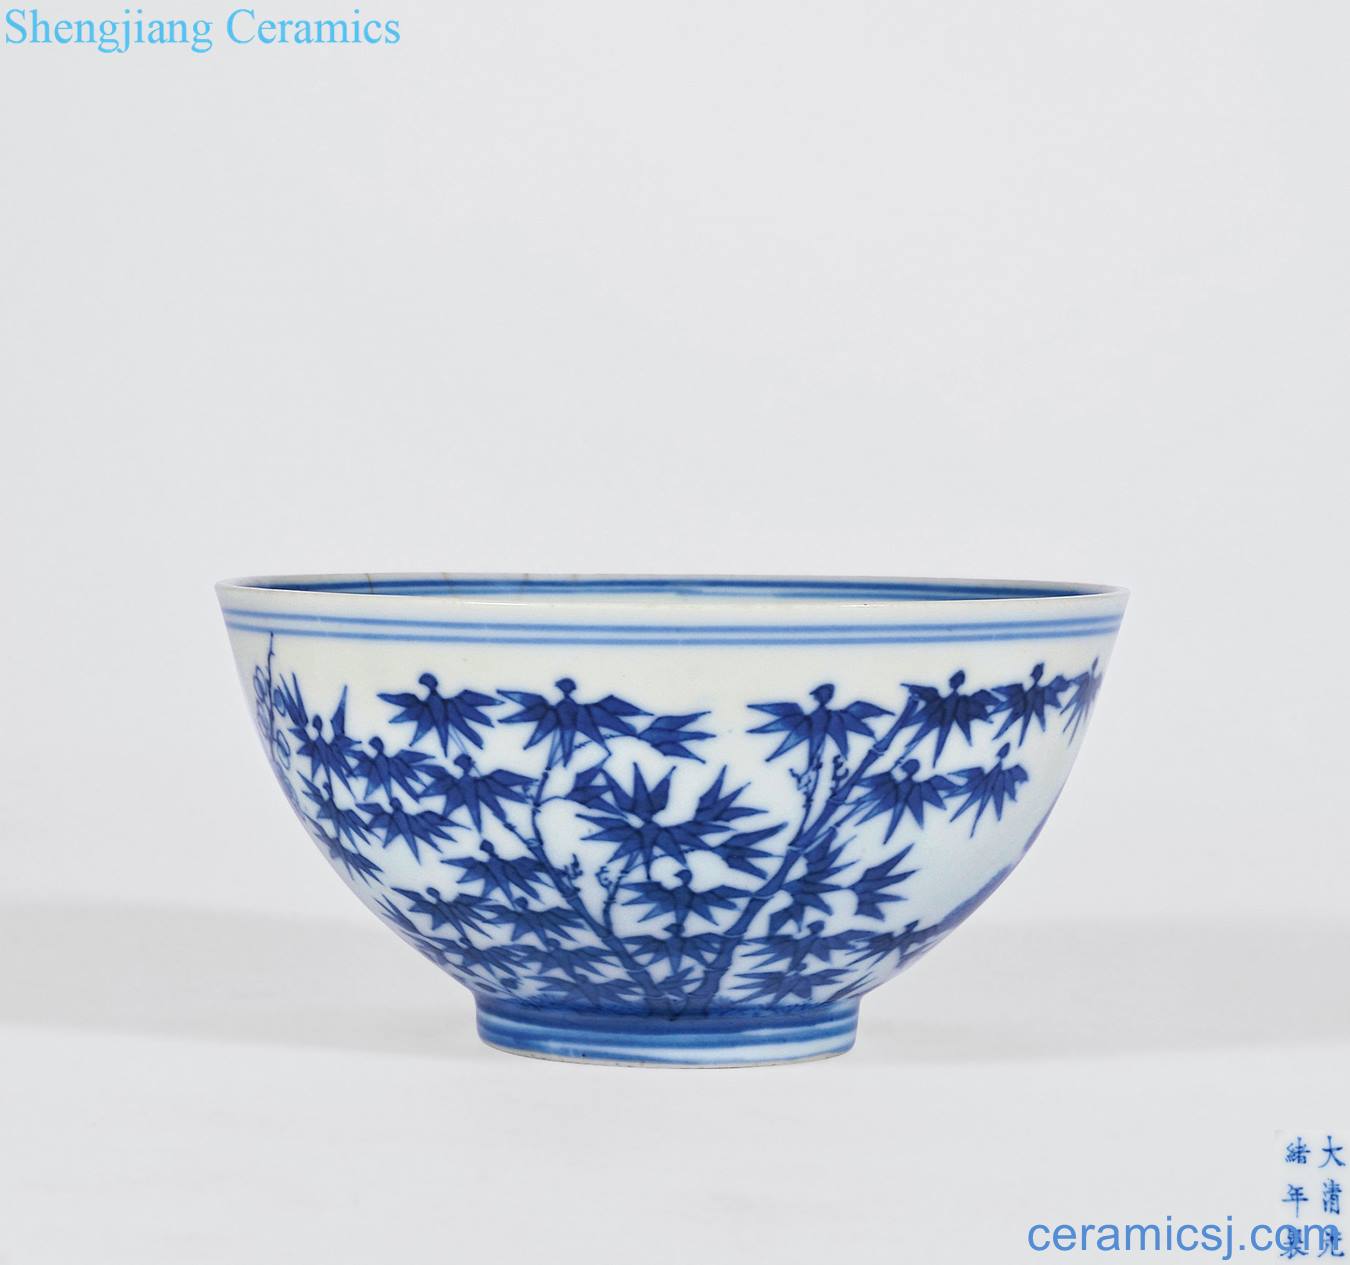 Qing guangxu Blue and white, poetic figure bowl